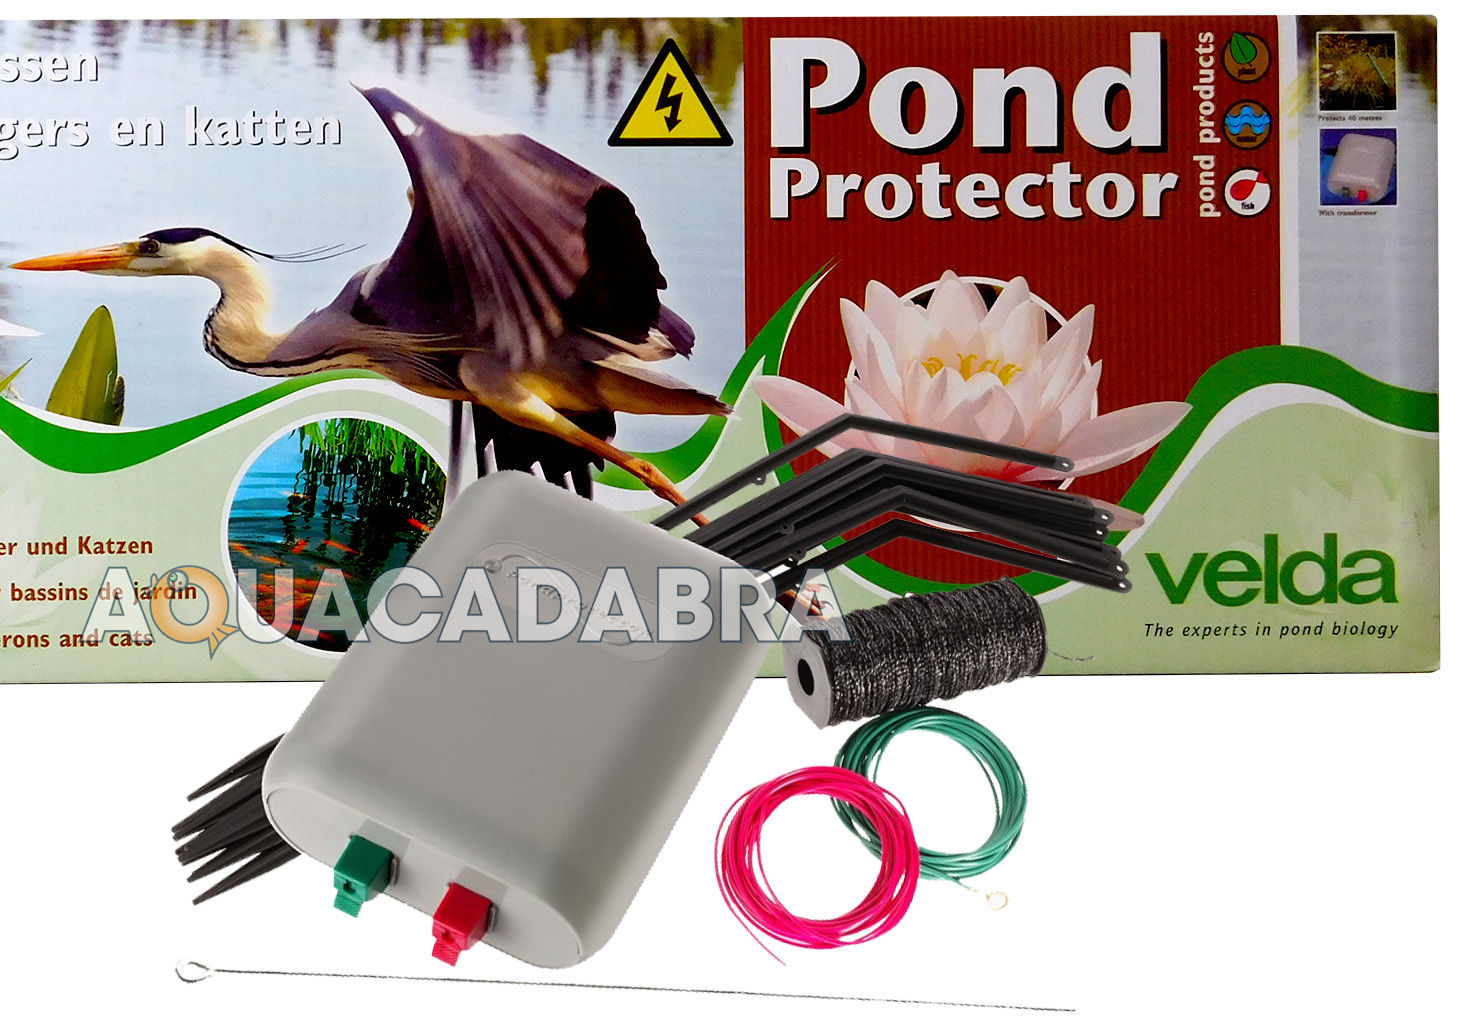 VELDA GARDEN POND PROTECTOR ELECTRIC FENCE KIT STOPS HERONS CATS